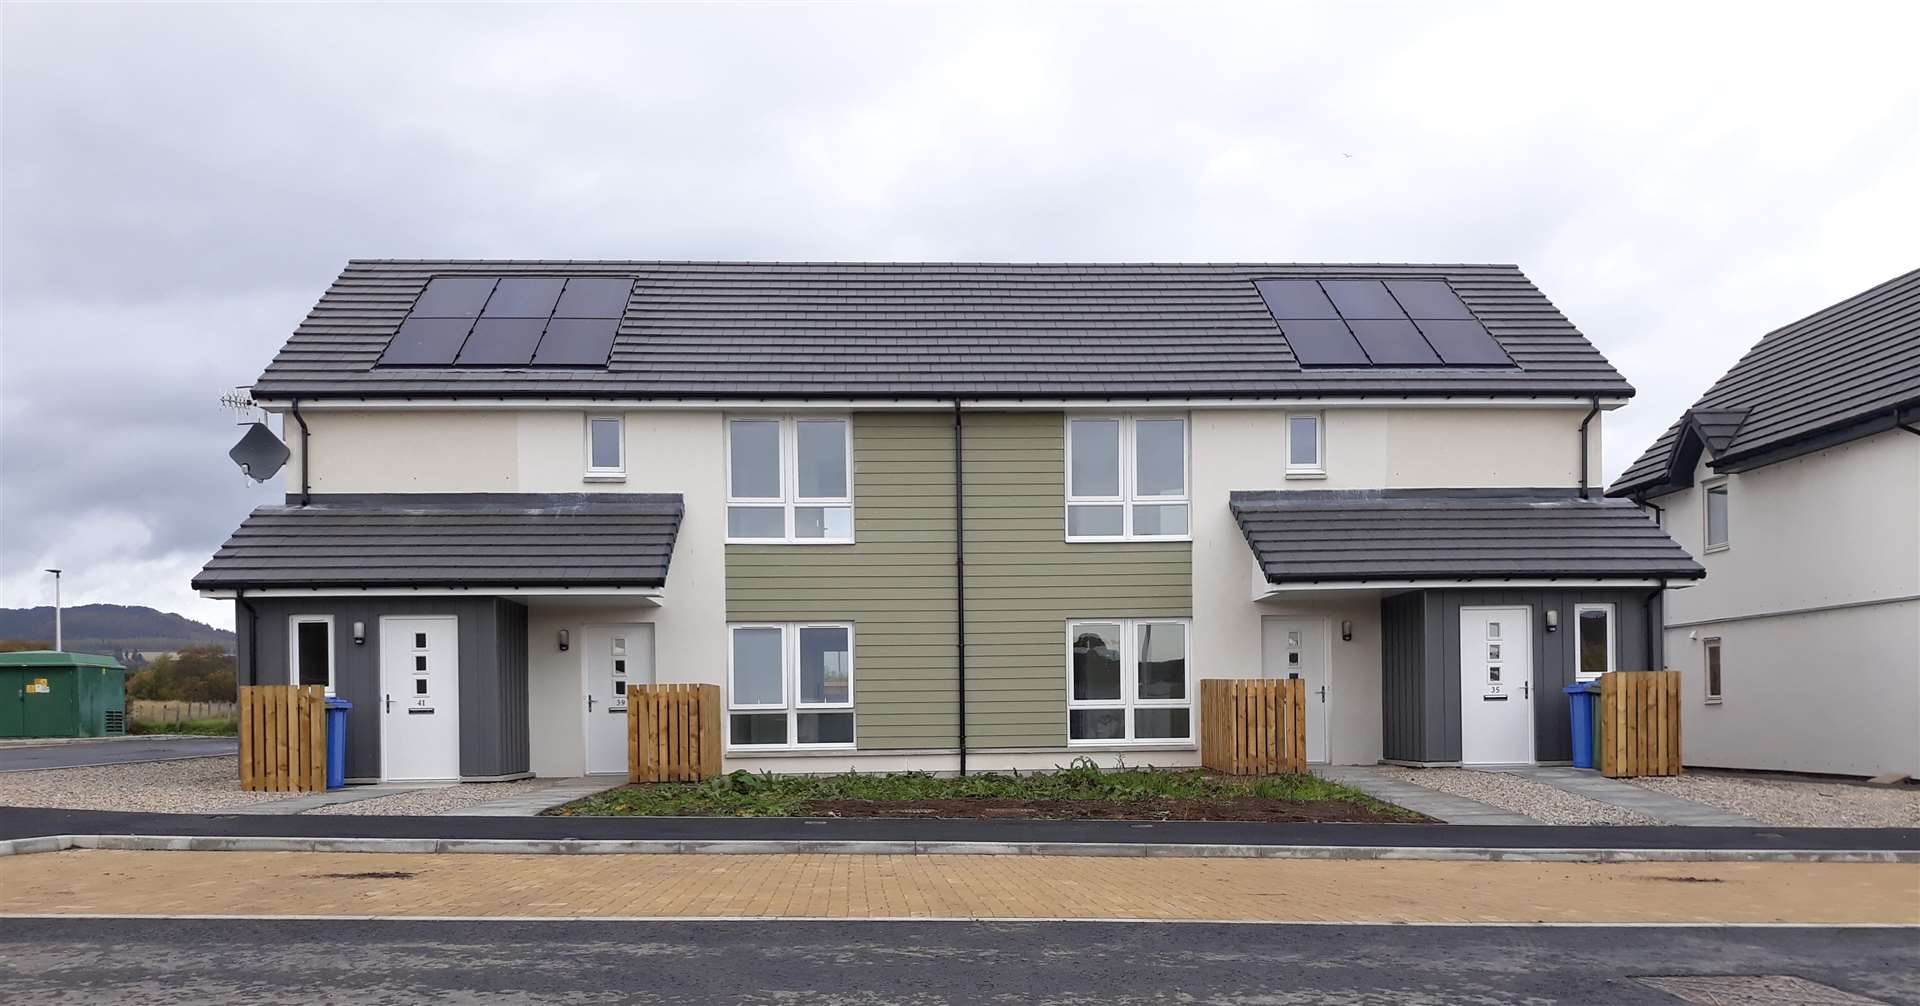 Some of Albyn's most recently completed housing, which is located at Dalmore, Alness.